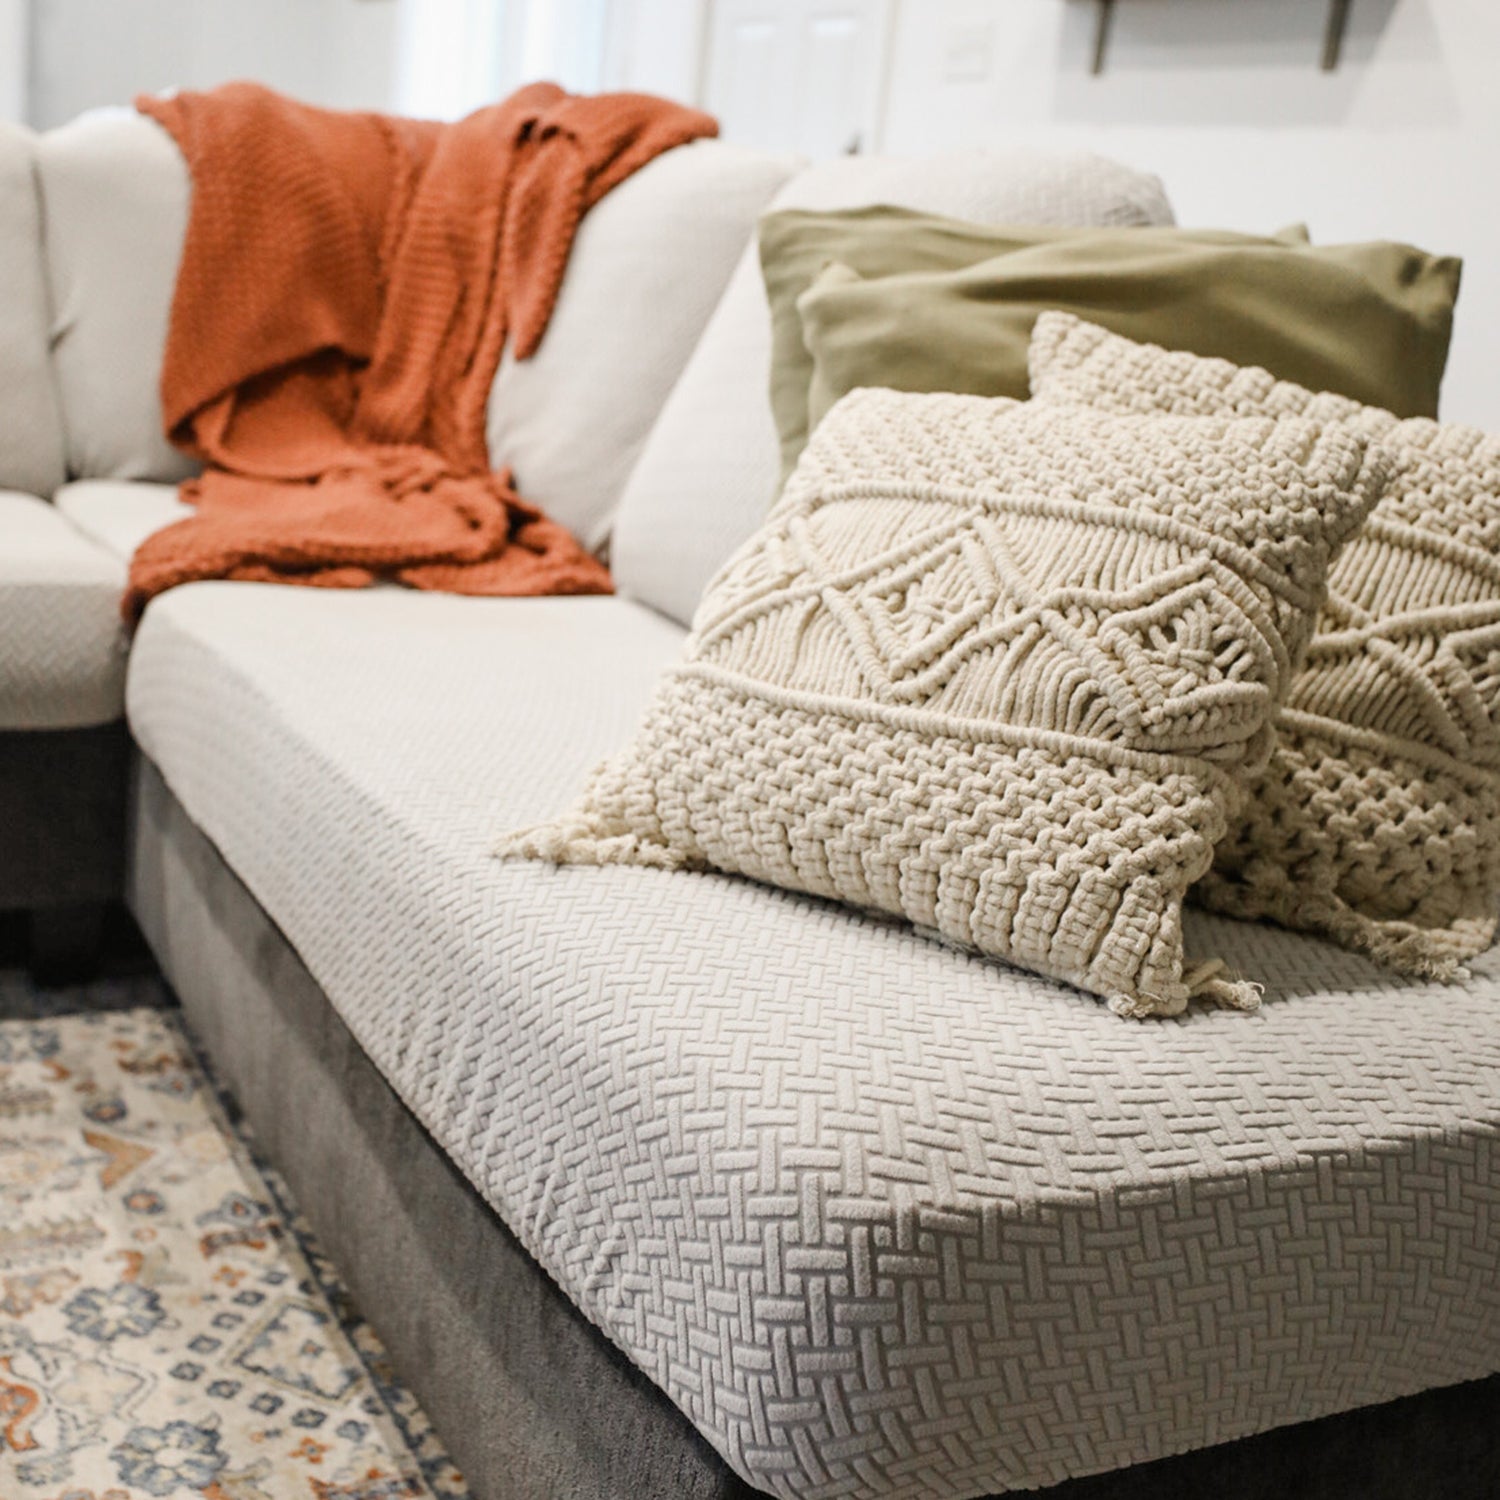 Sofa Care 101: How to Prevent Wear and Tear Damage - Nolan Interior